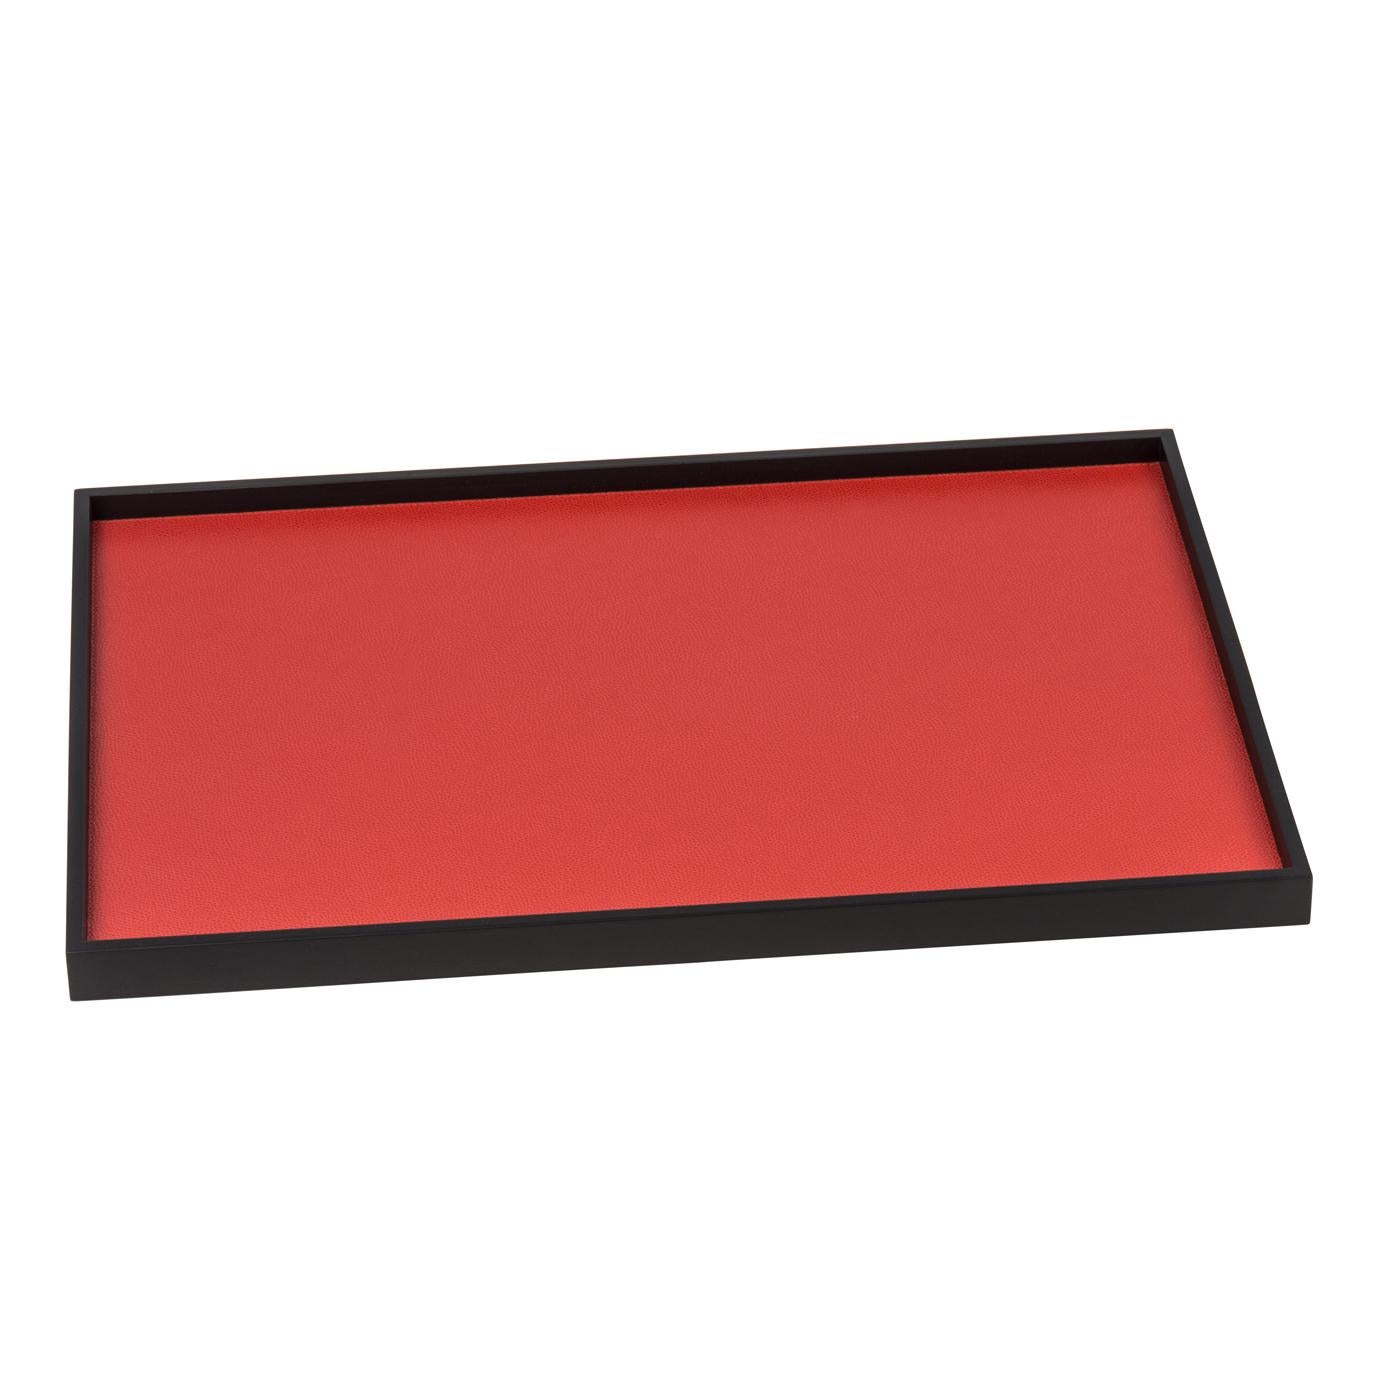 Italian Phorma Small Rectangular Tray in Wengé For Sale